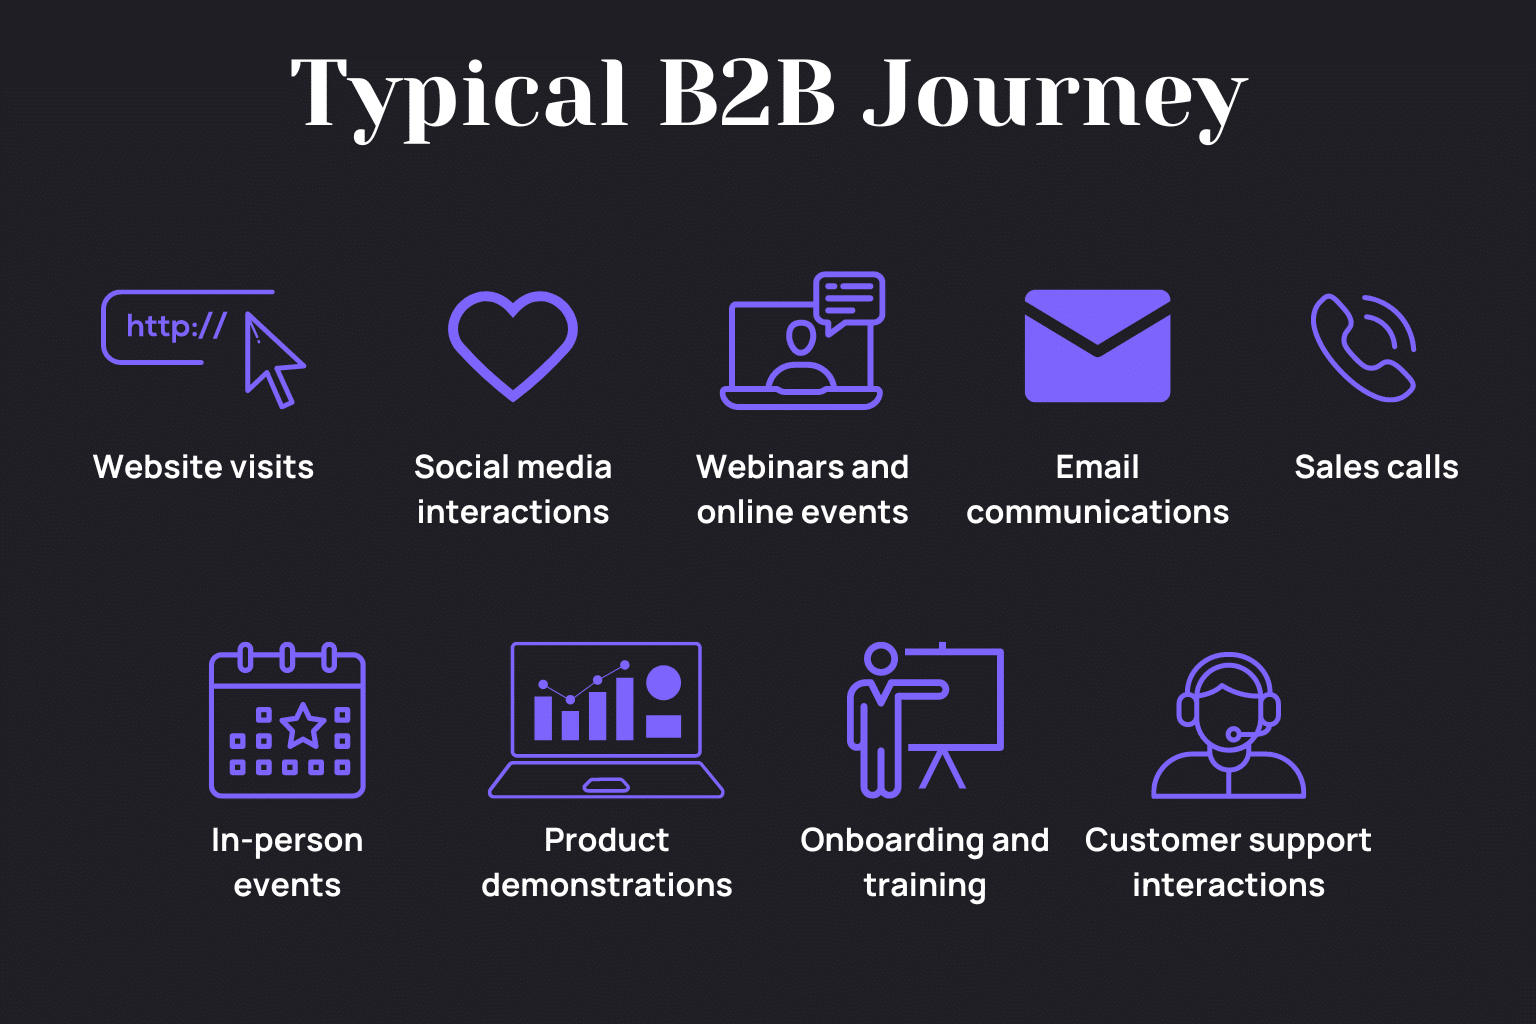 Typical B2B Journey Touch points